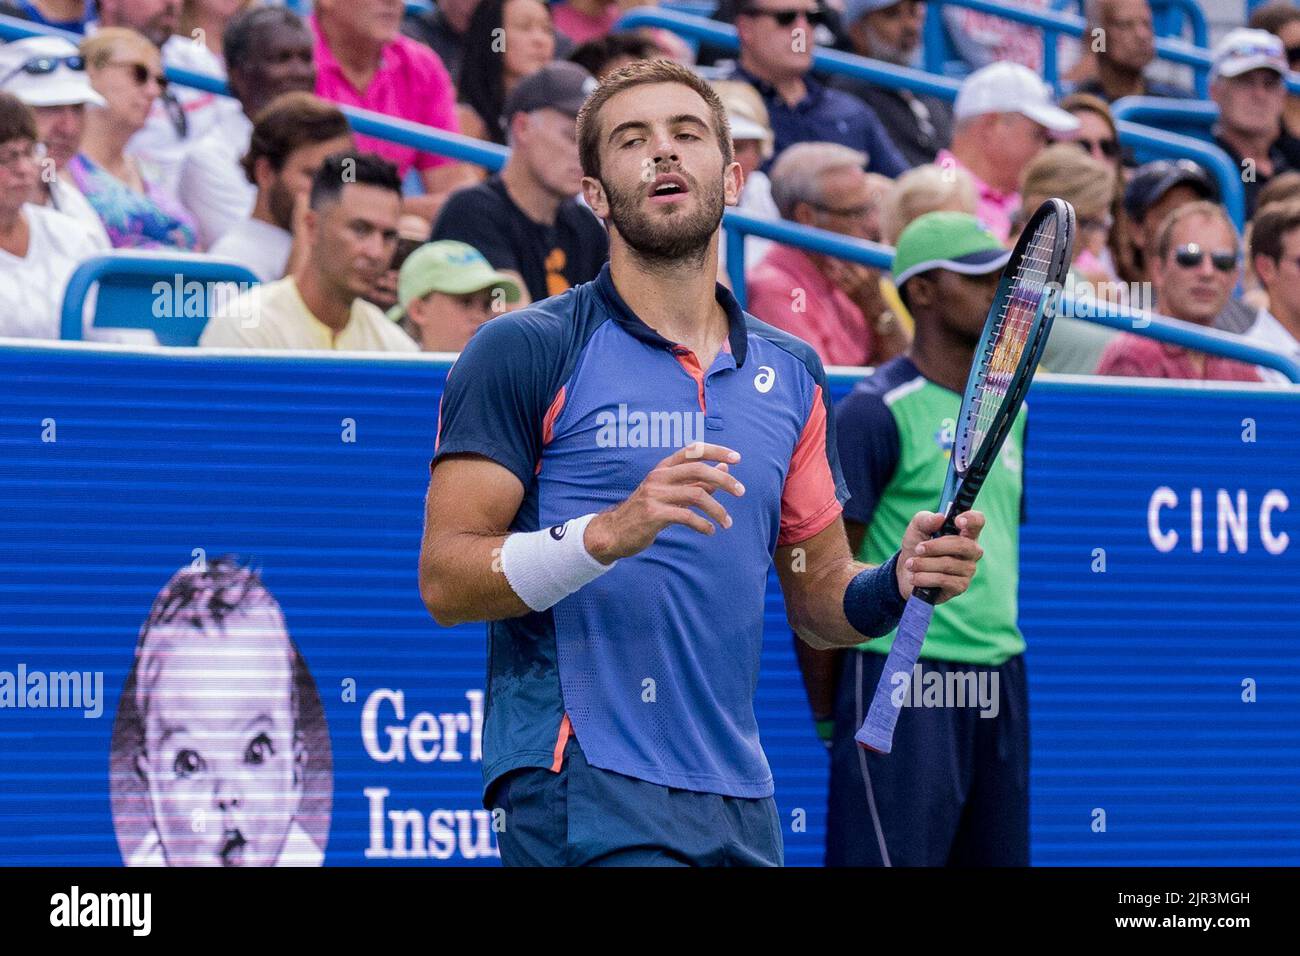 Mason, Ohio, USA. 21st Aug, 2022. Boma Coric (Cro) reacts to a shot during championship match of the Western and Southern Open at the Lindner Family Tennis Center, Mason, Oh. (Credit Image: © Scott Stuart/ZUMA Press Wire) Stock Photo